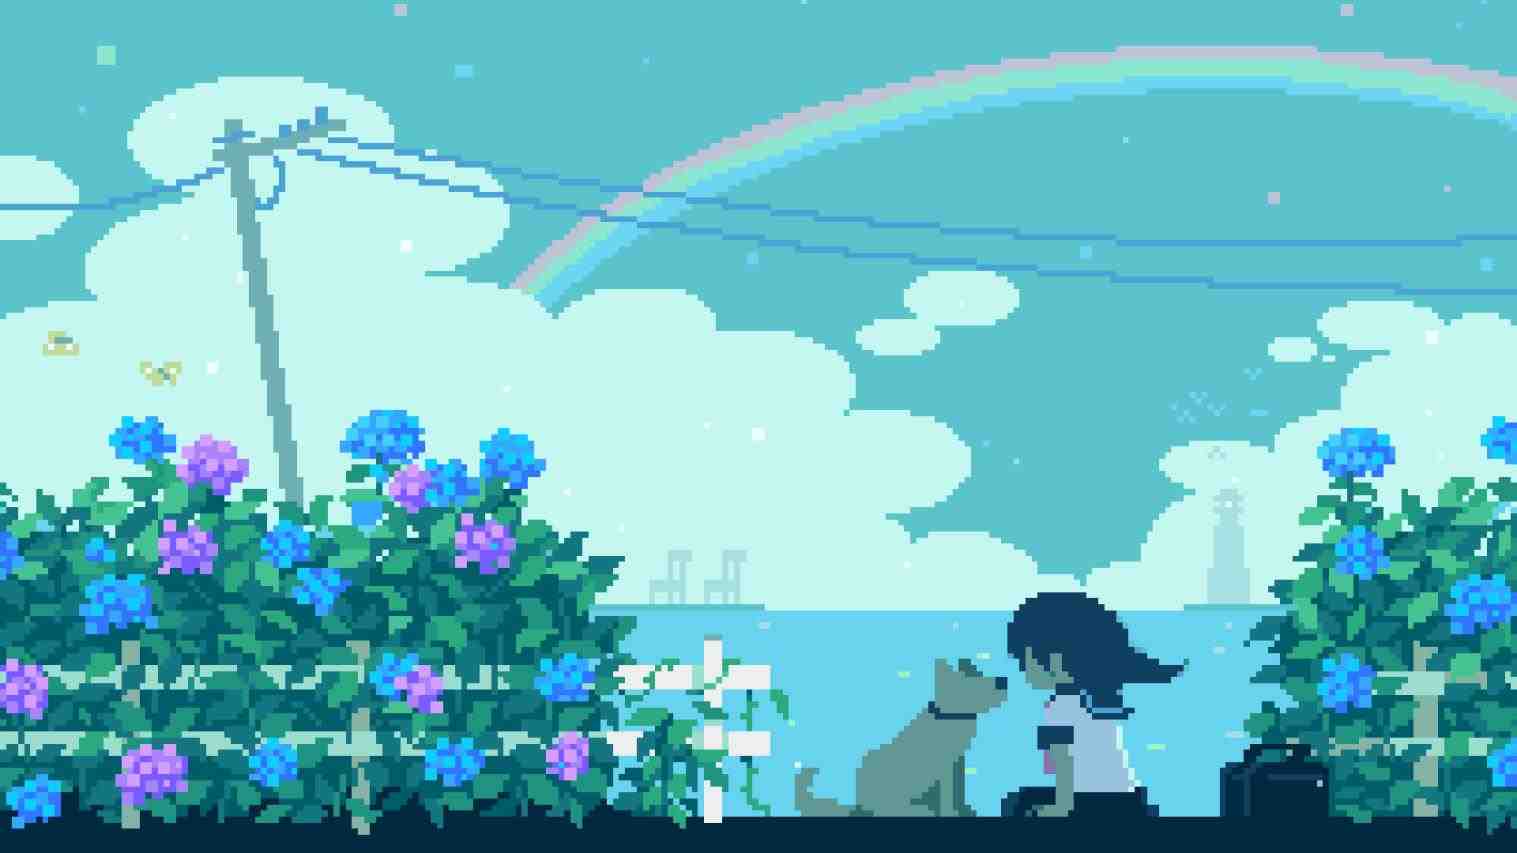 Pixel art of a girl and her dog looking at a rainbow - Art, pixel art